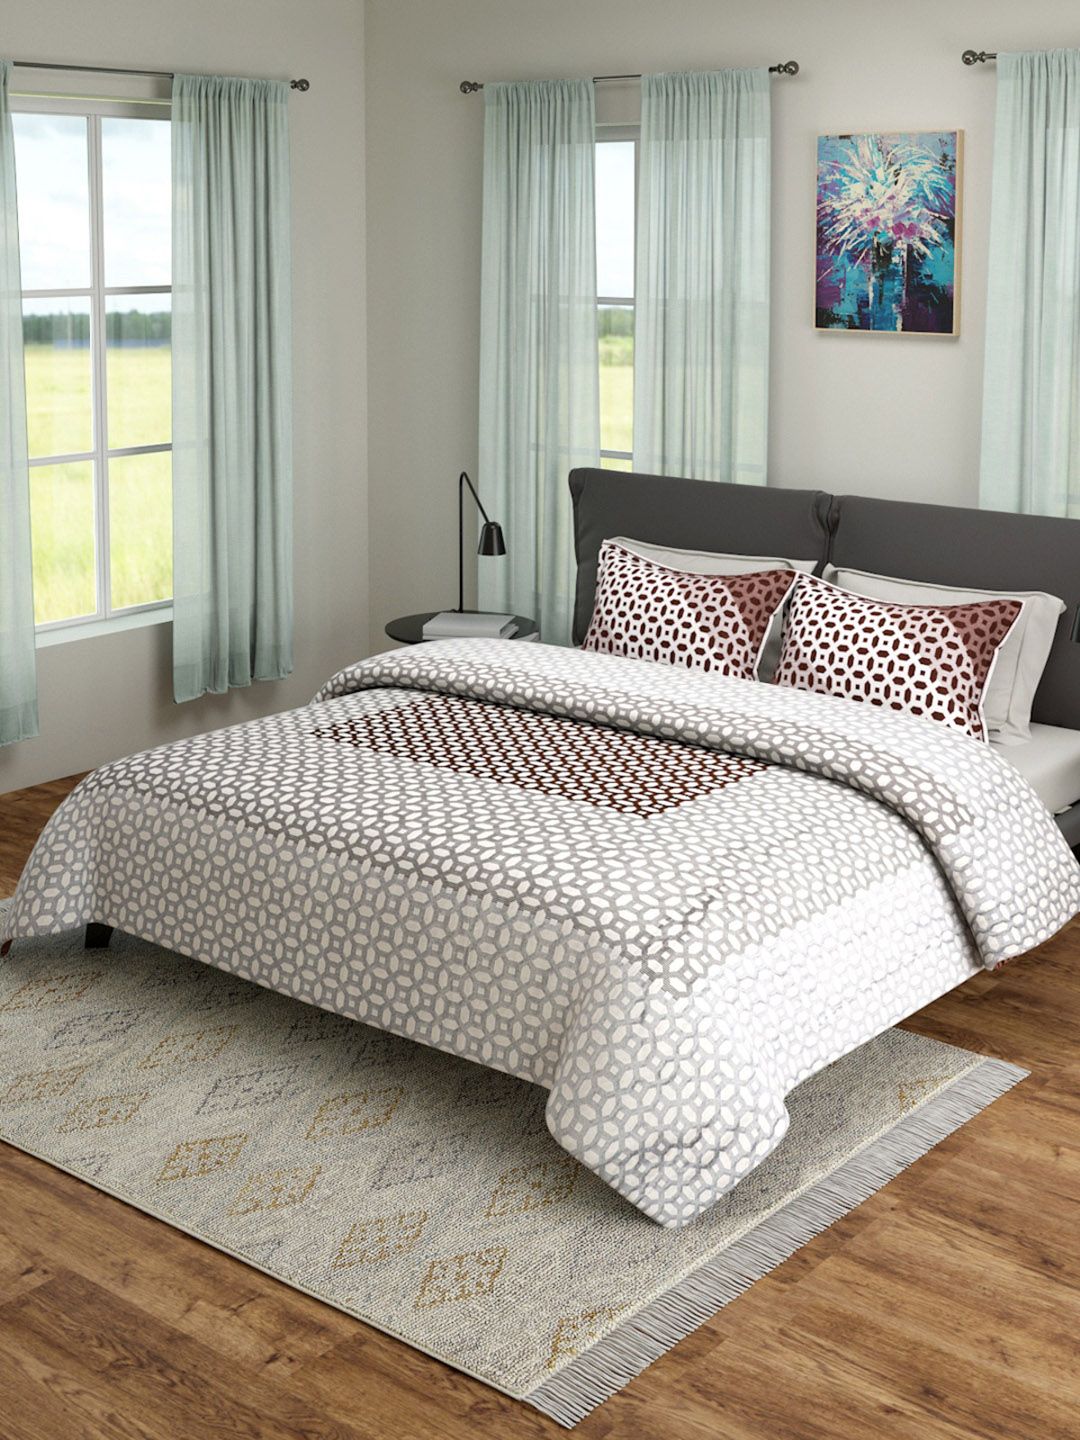 ROMEE Turquoise Brown & White Queen Sized Printed 180TC Bed Cover With 2 Pillow Cases Price in India